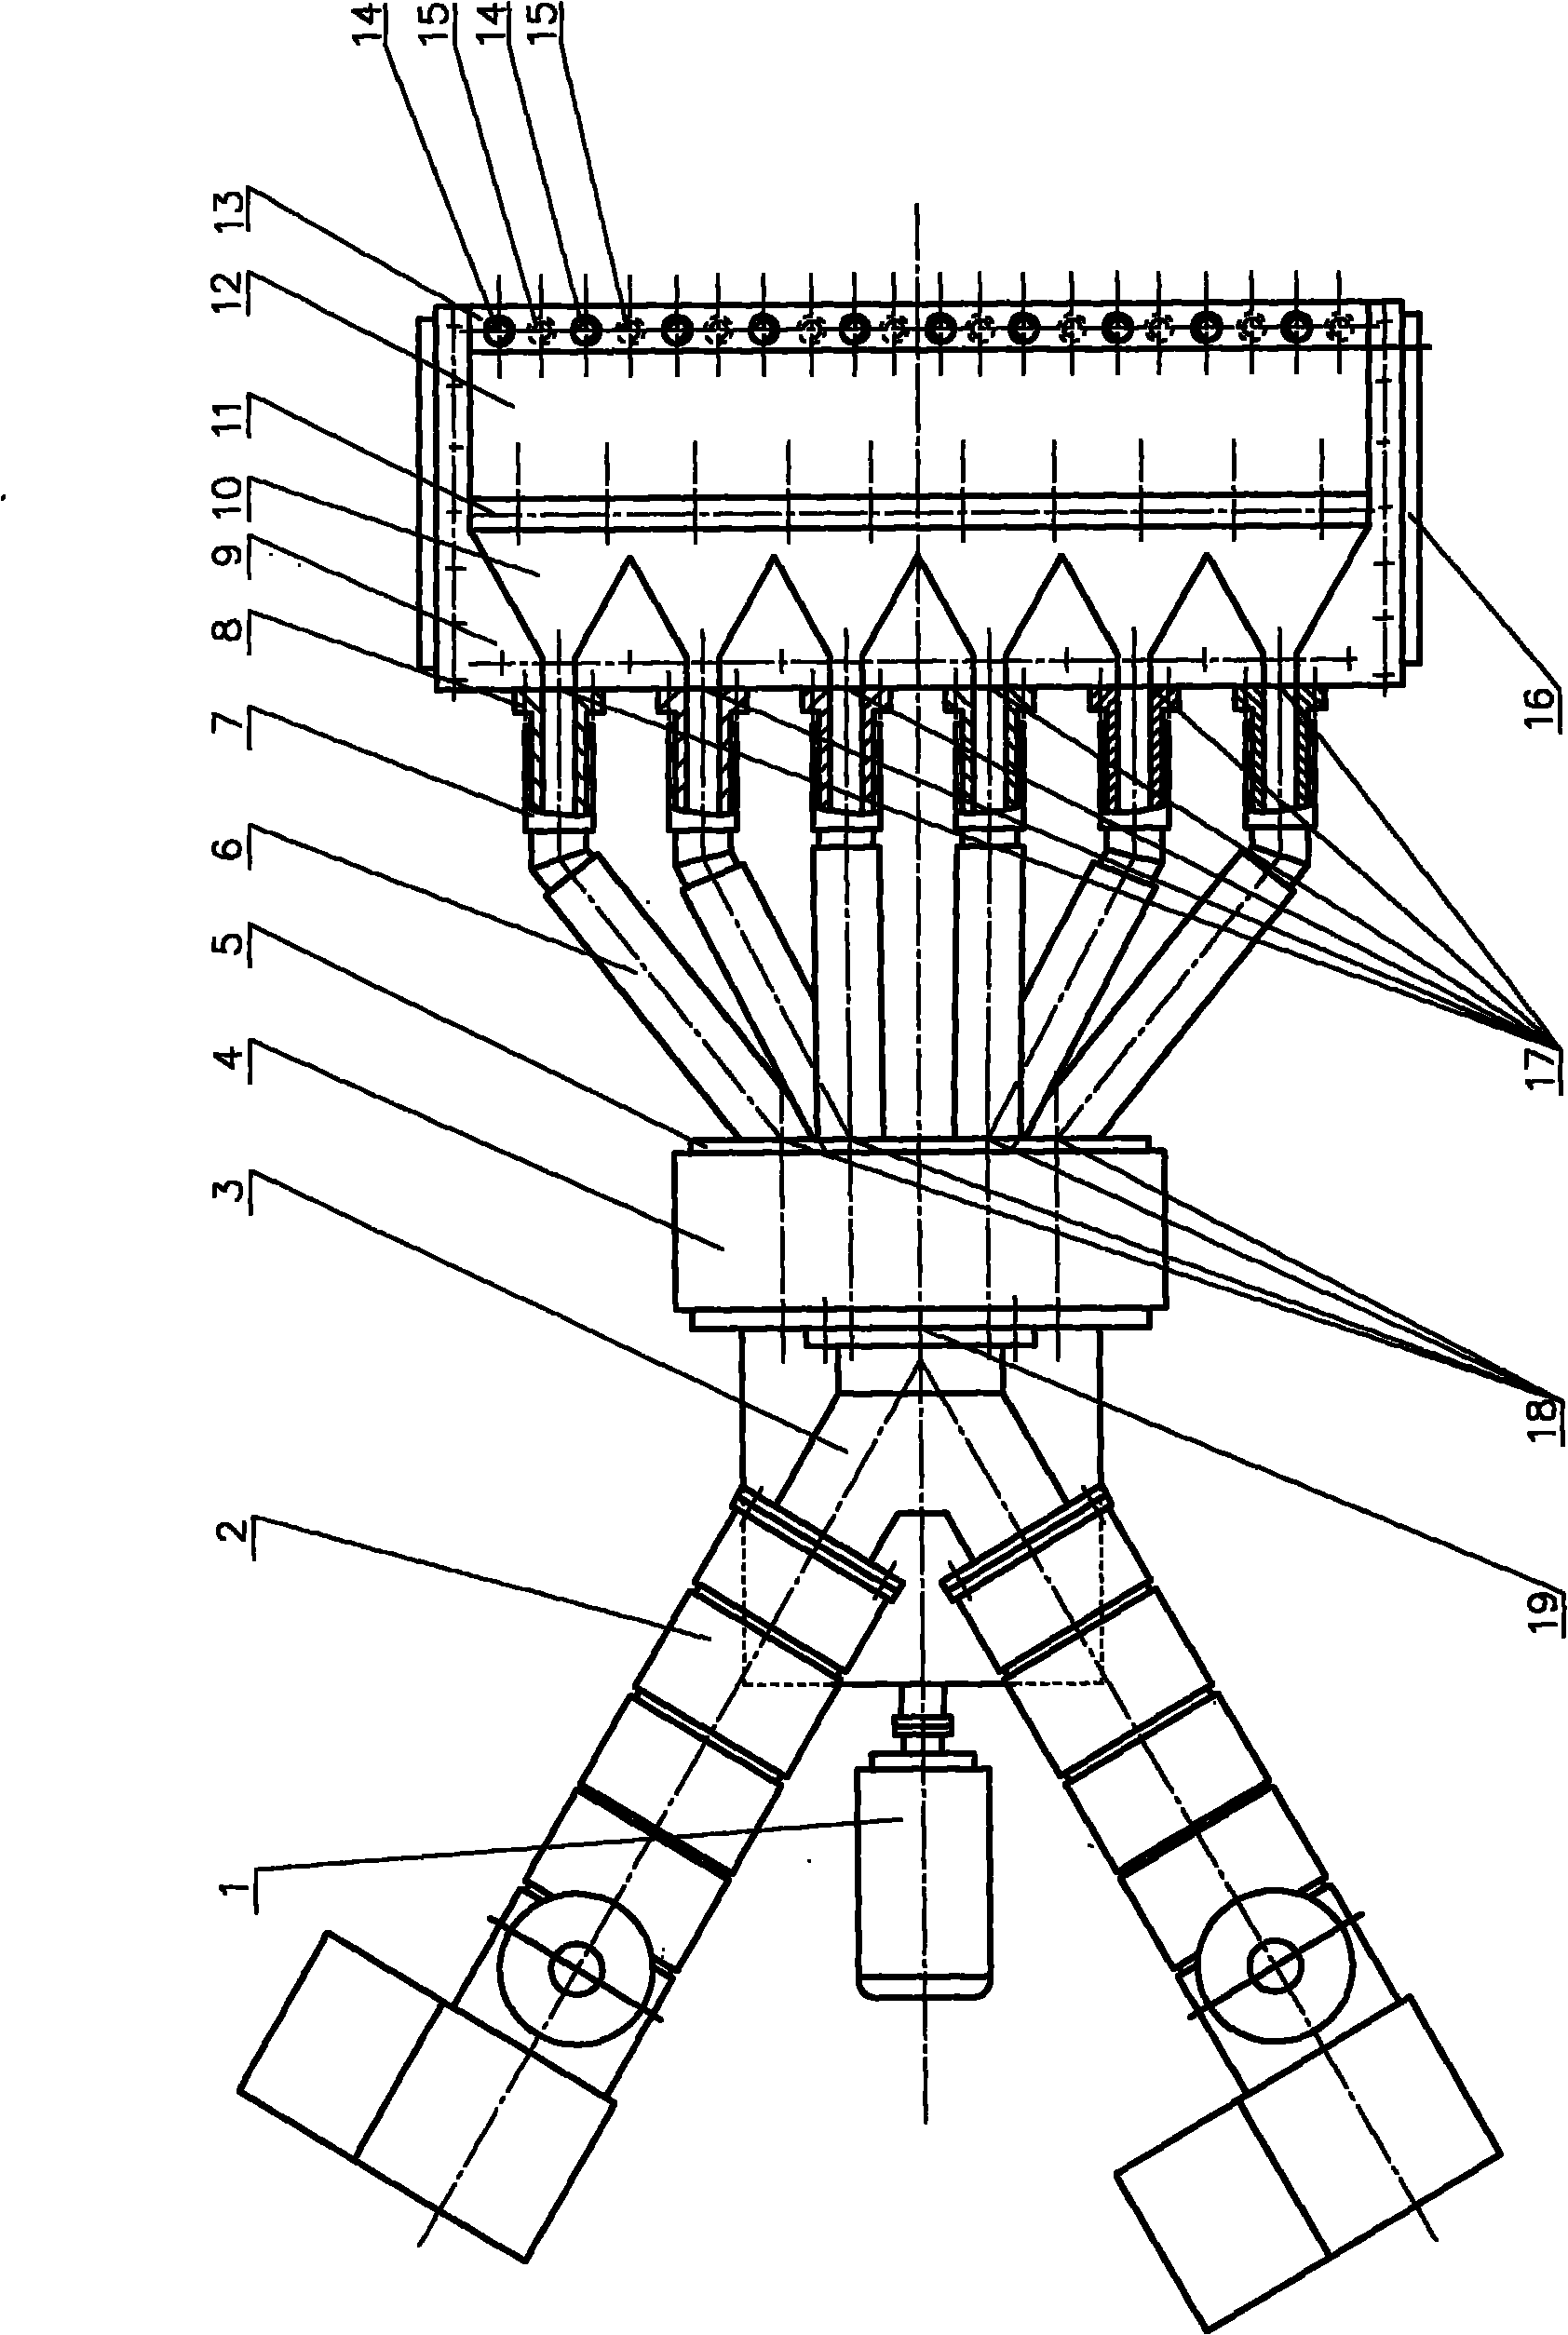 Extrusion moulding apparatus for large-scale macromolecular product and process thereof